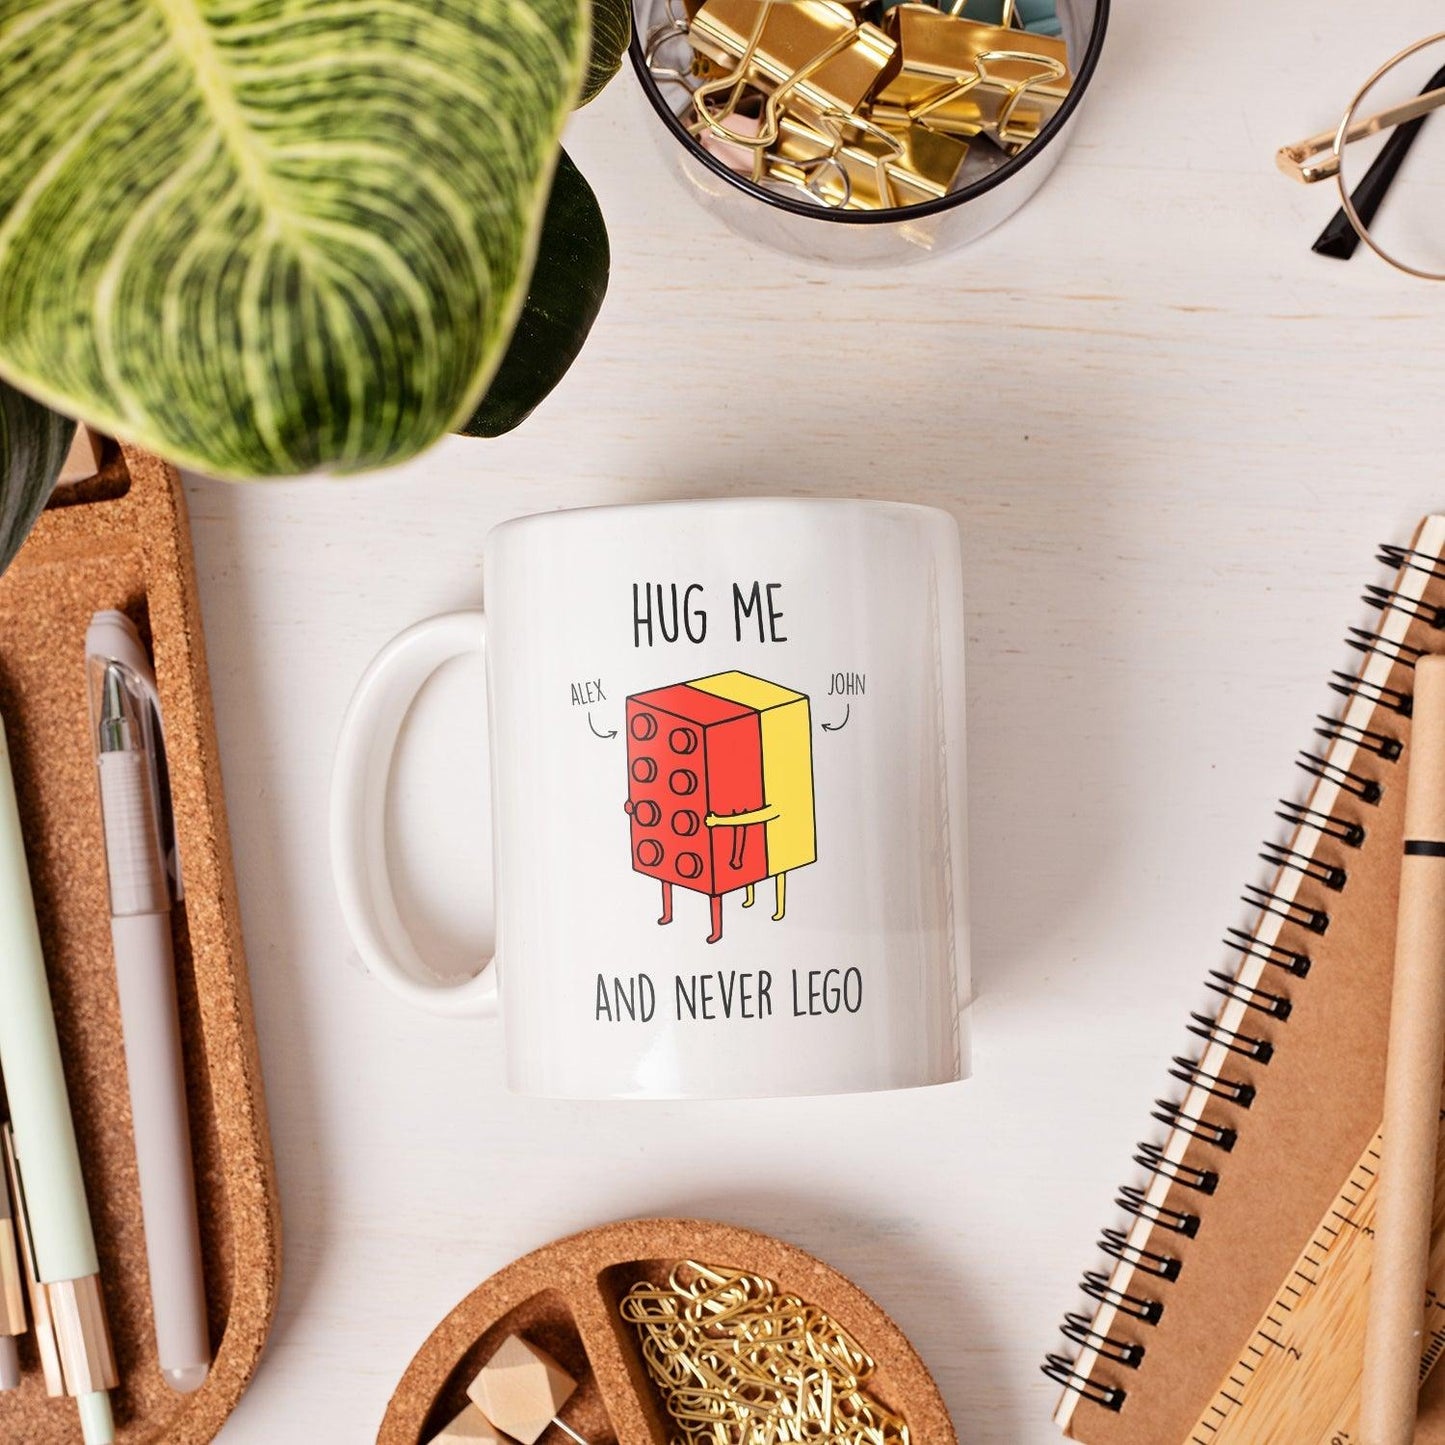 Hug Me And Never Lego - Personalized Anniversary or Valentine's Day gift for Boyfriend or Girlfriend - Custom Mug - MyMindfulGifts